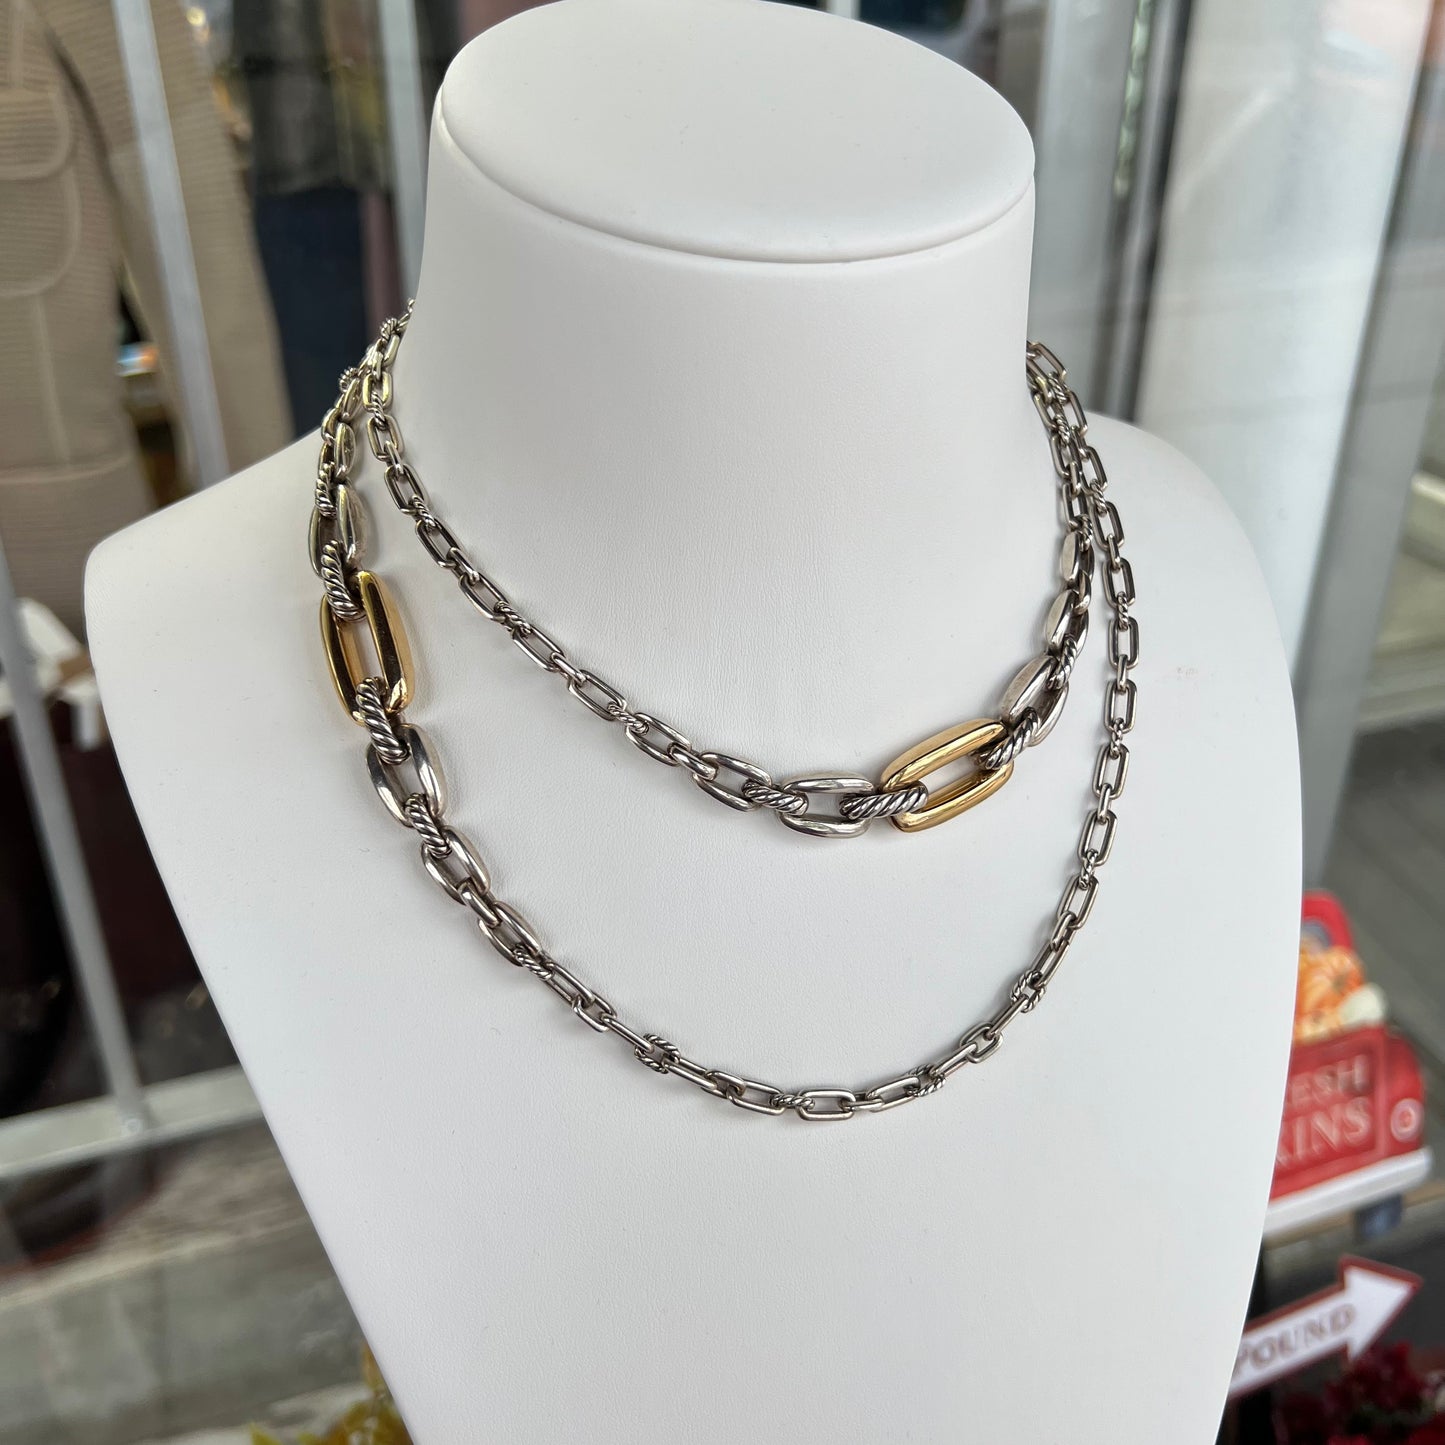 David Yurman Wellesley Chain Link Necklace with 18k Gold